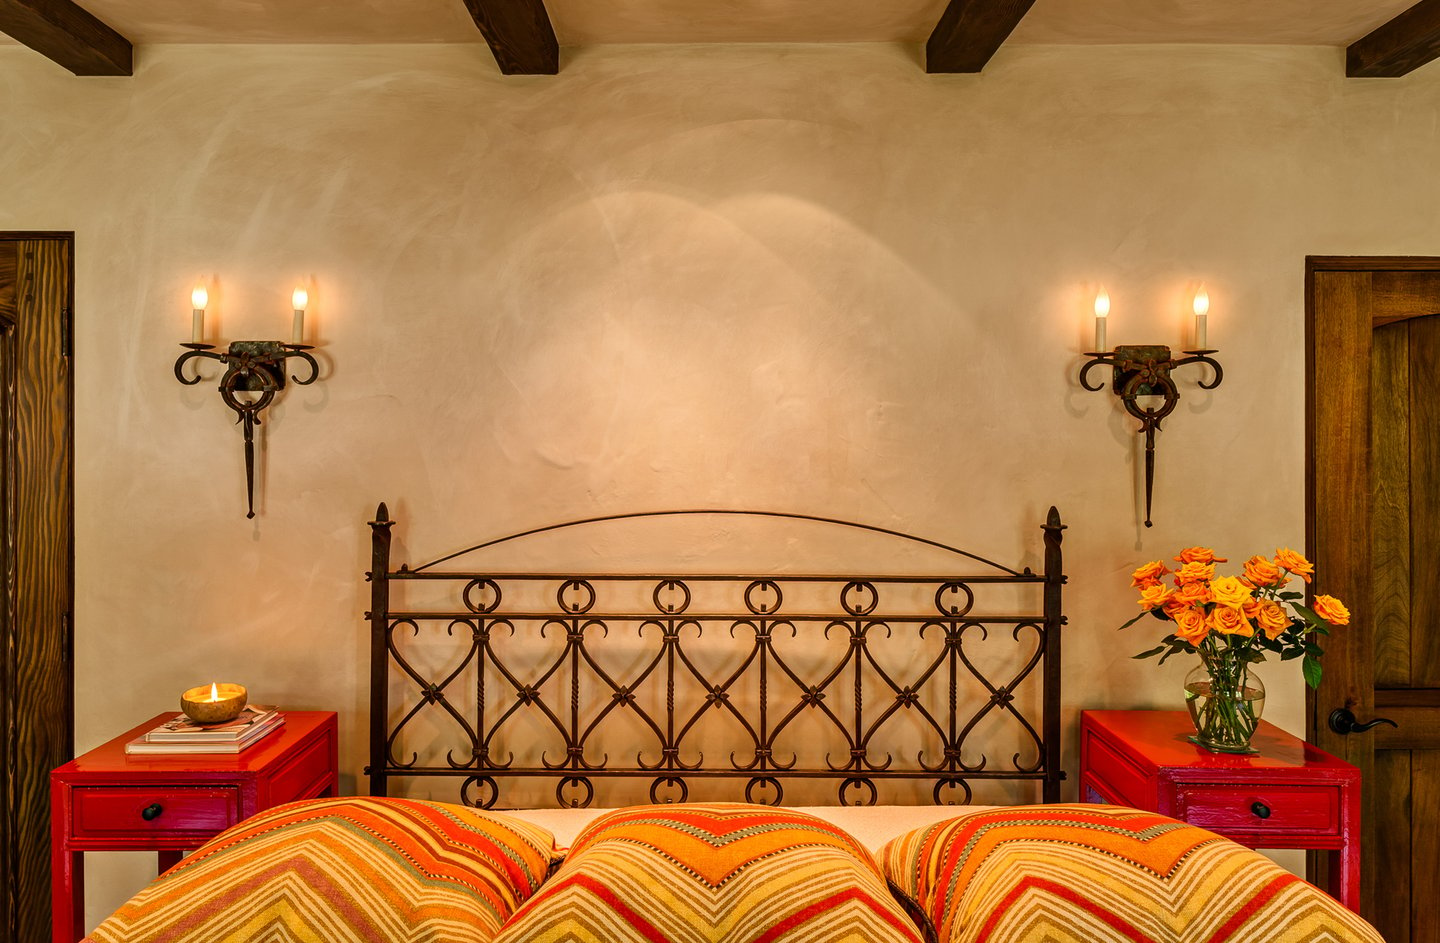 Intricate metalwork of bed frame and light fixtures of the bedroom.